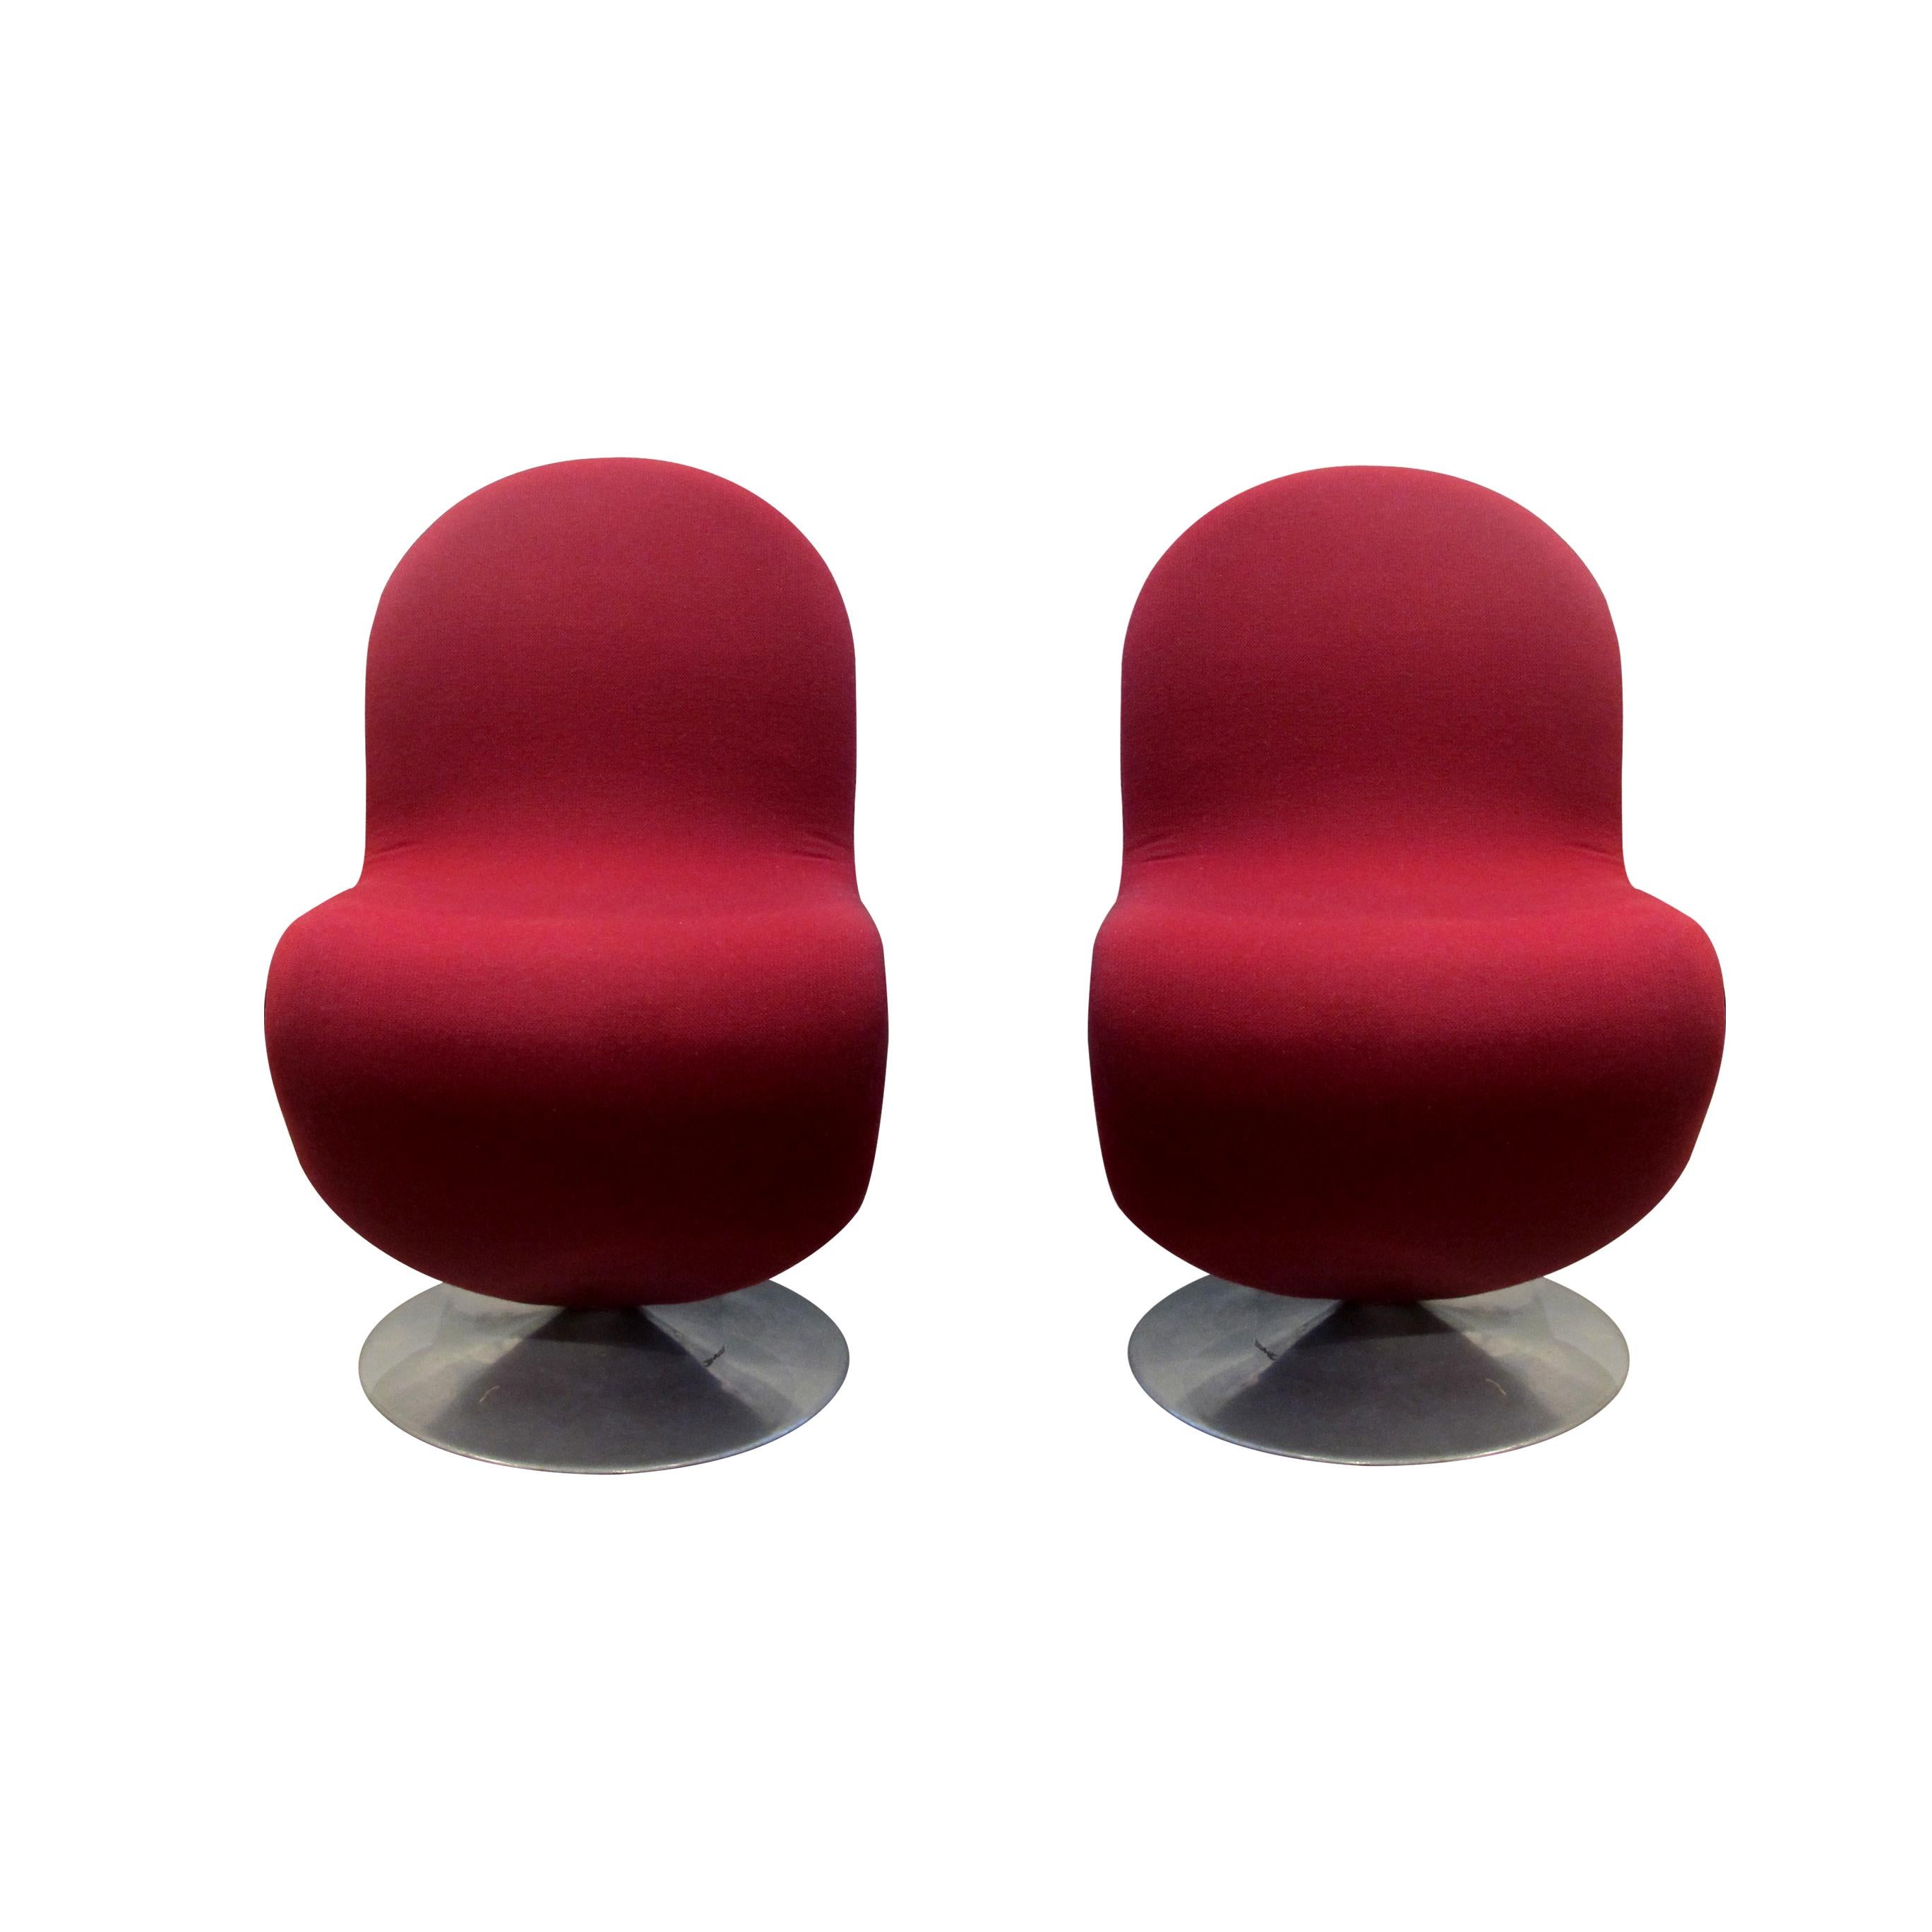 A pair of original 1970s iconic cantilever Verner Panton 1-2-3 Series swivel dining chairs with a brushed steel base. The chairs are upholstered in a red wool fabric with some minor signs of wear on the base. The tight fit sleeves are held on the